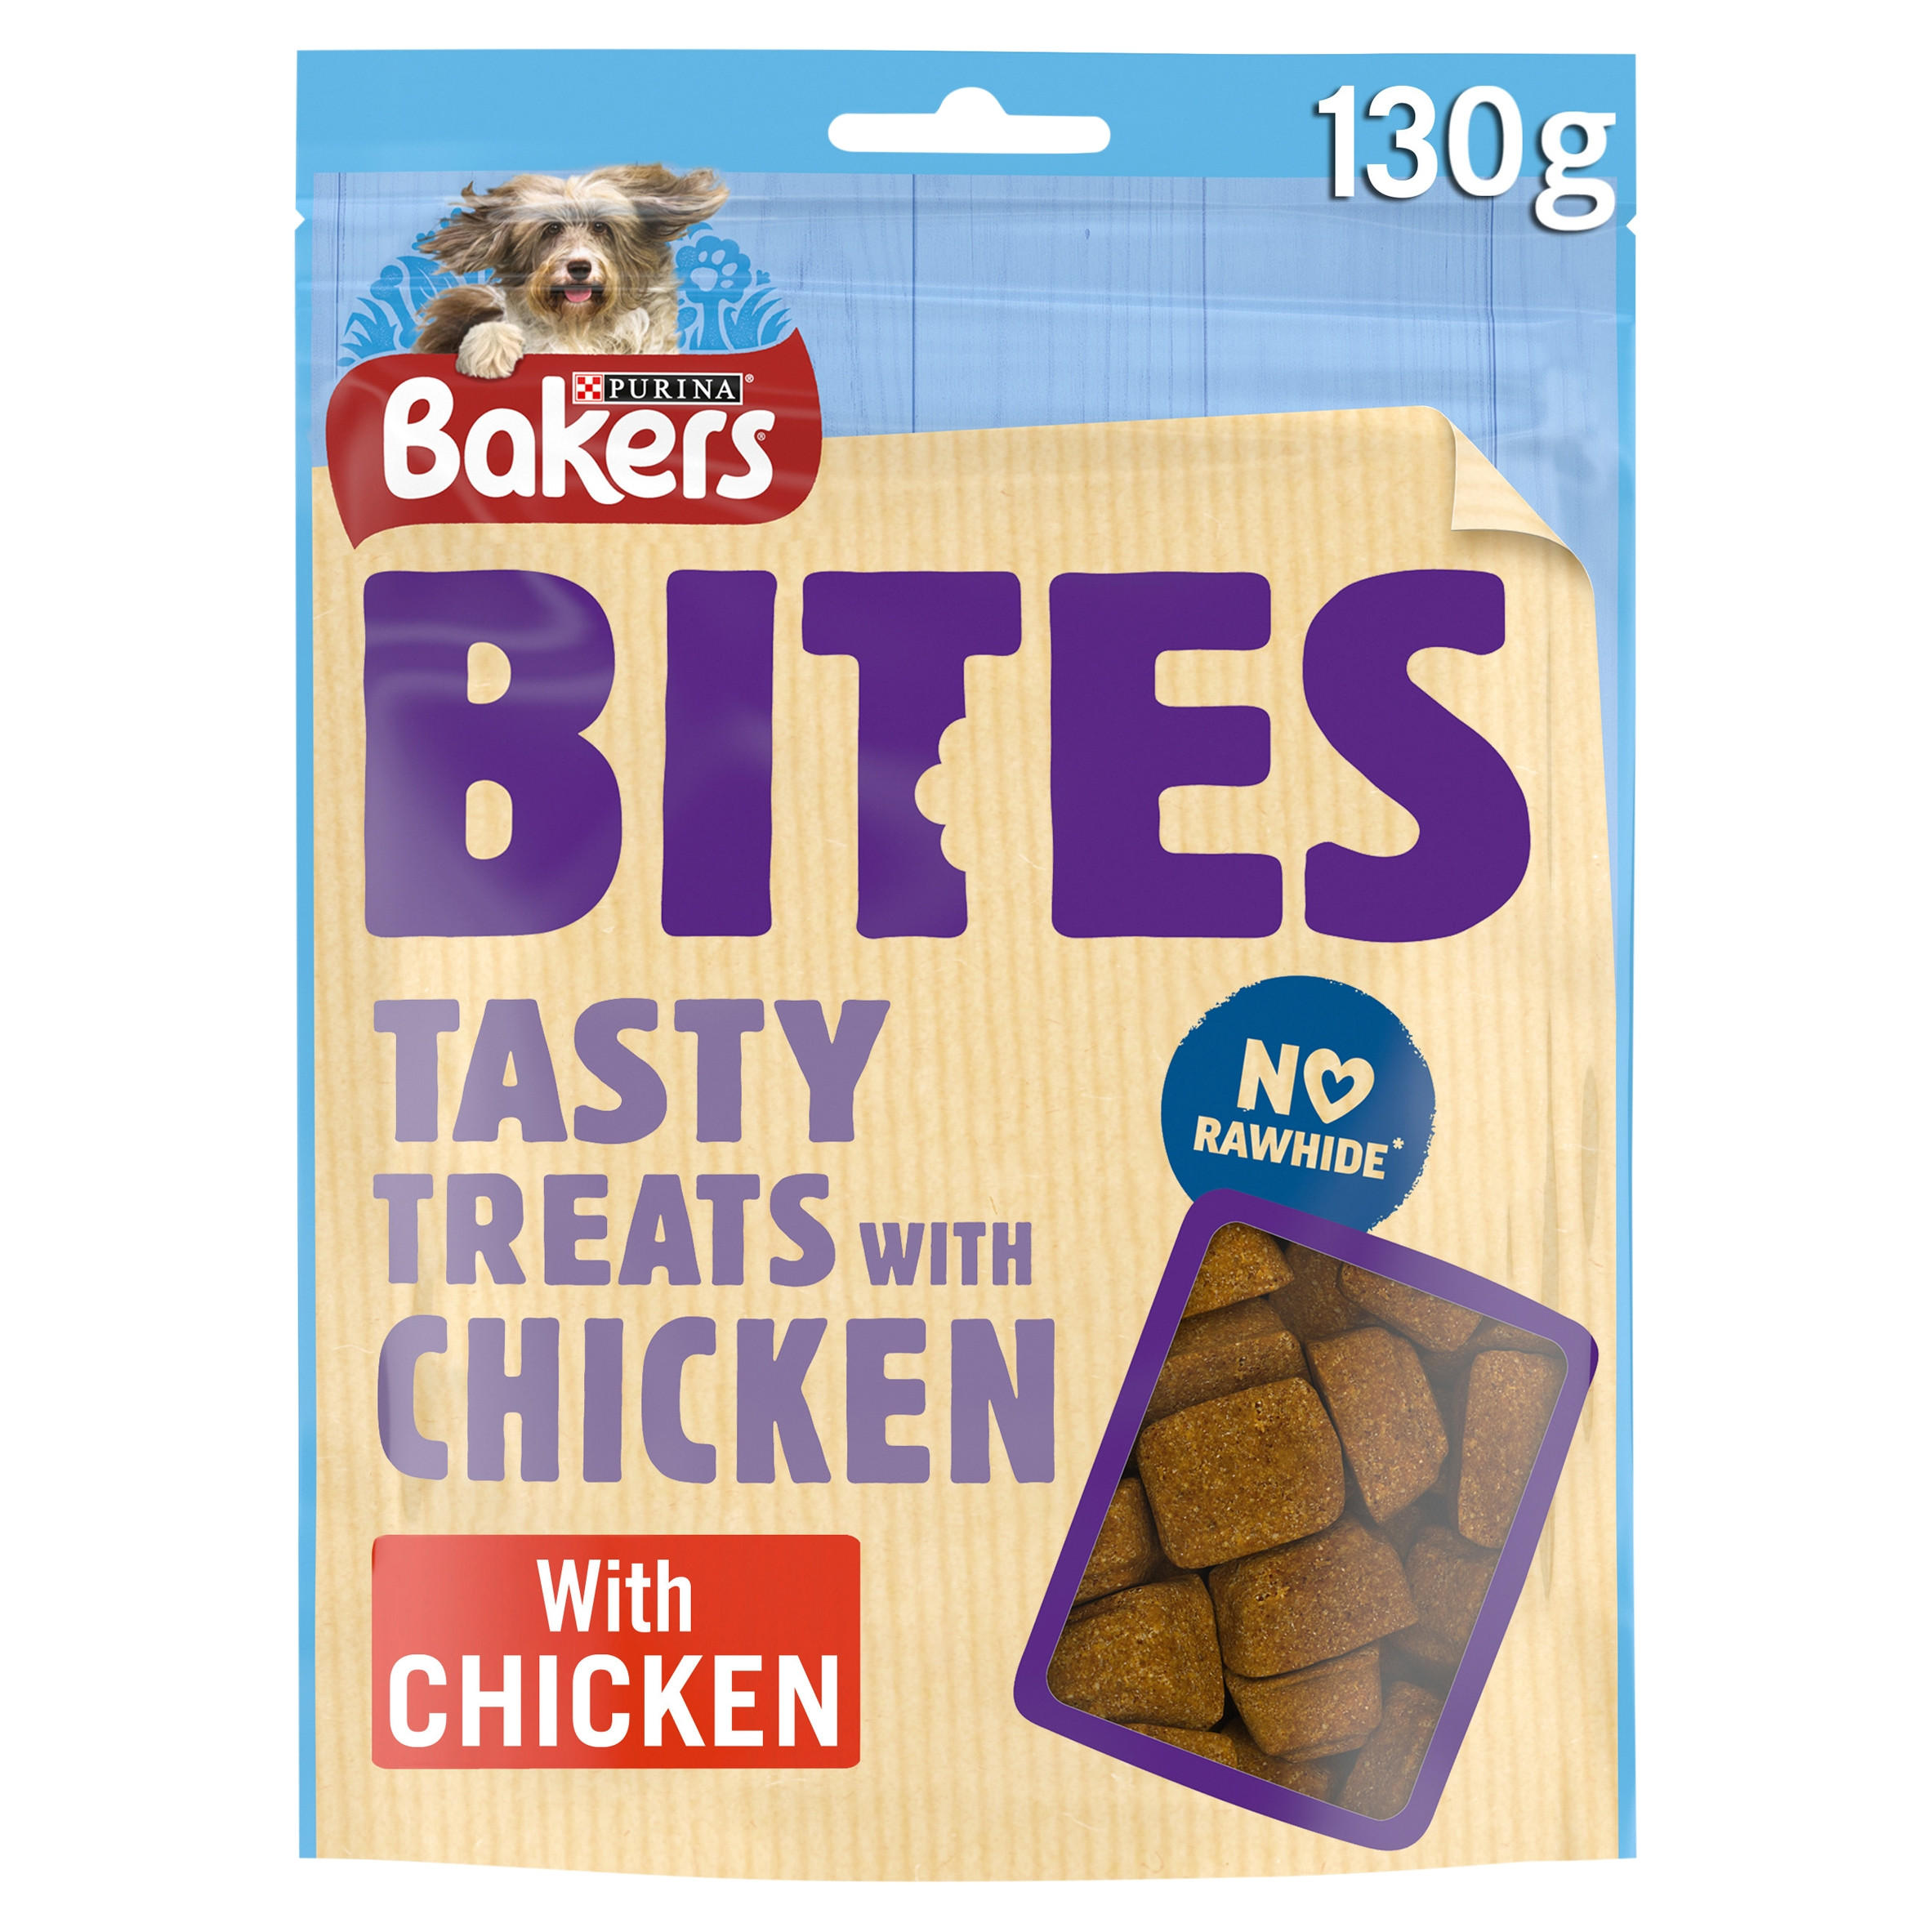 Bakers Bites Tasty Treats with Chicken 130g | Pet Treats | Iceland Foods